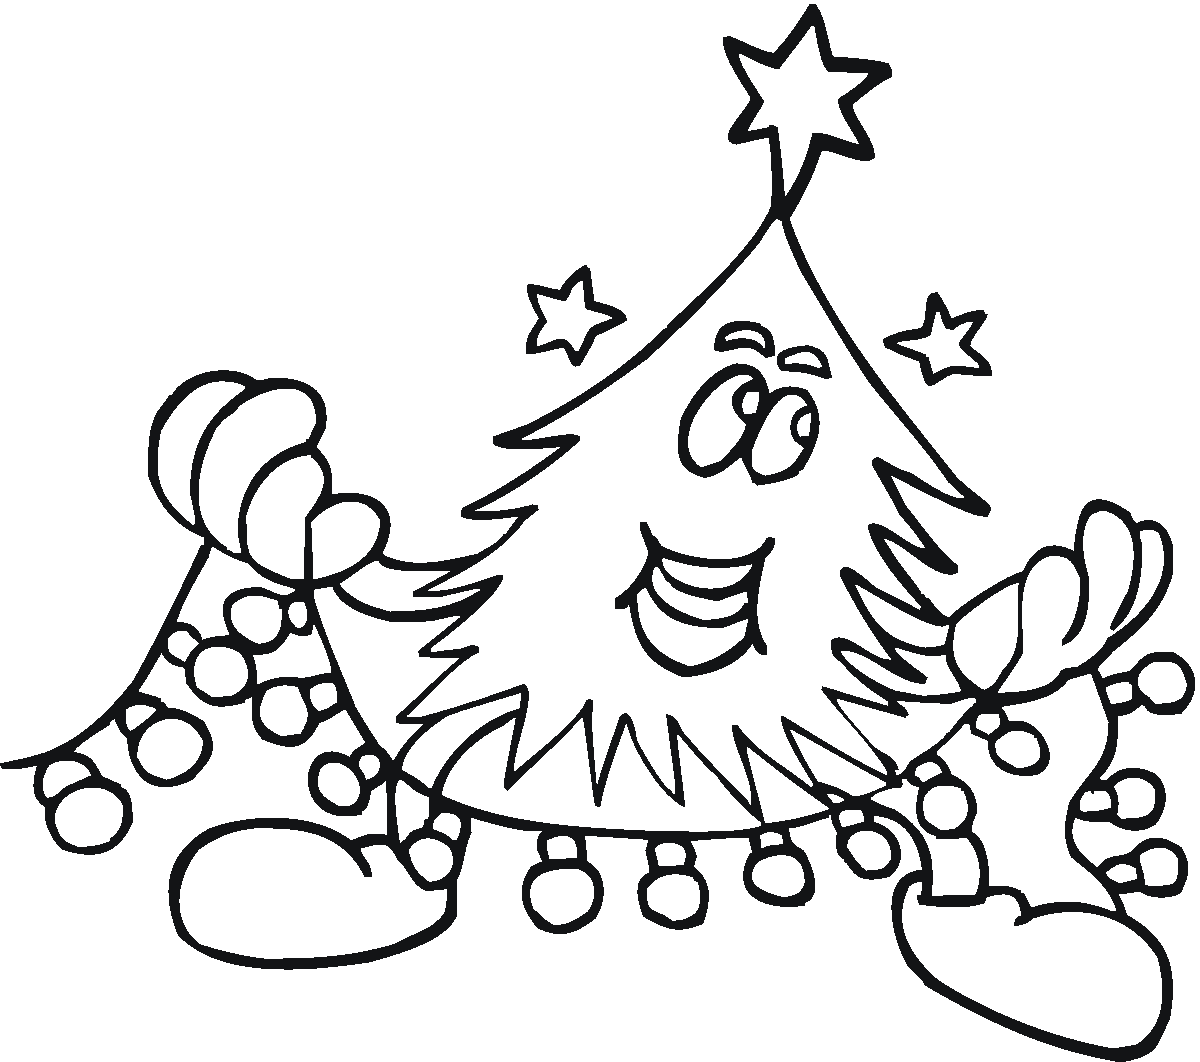 Free Printable Christmas Tree Coloring Pages Coloring Wallpapers Download Free Images Wallpaper [coloring654.blogspot.com]